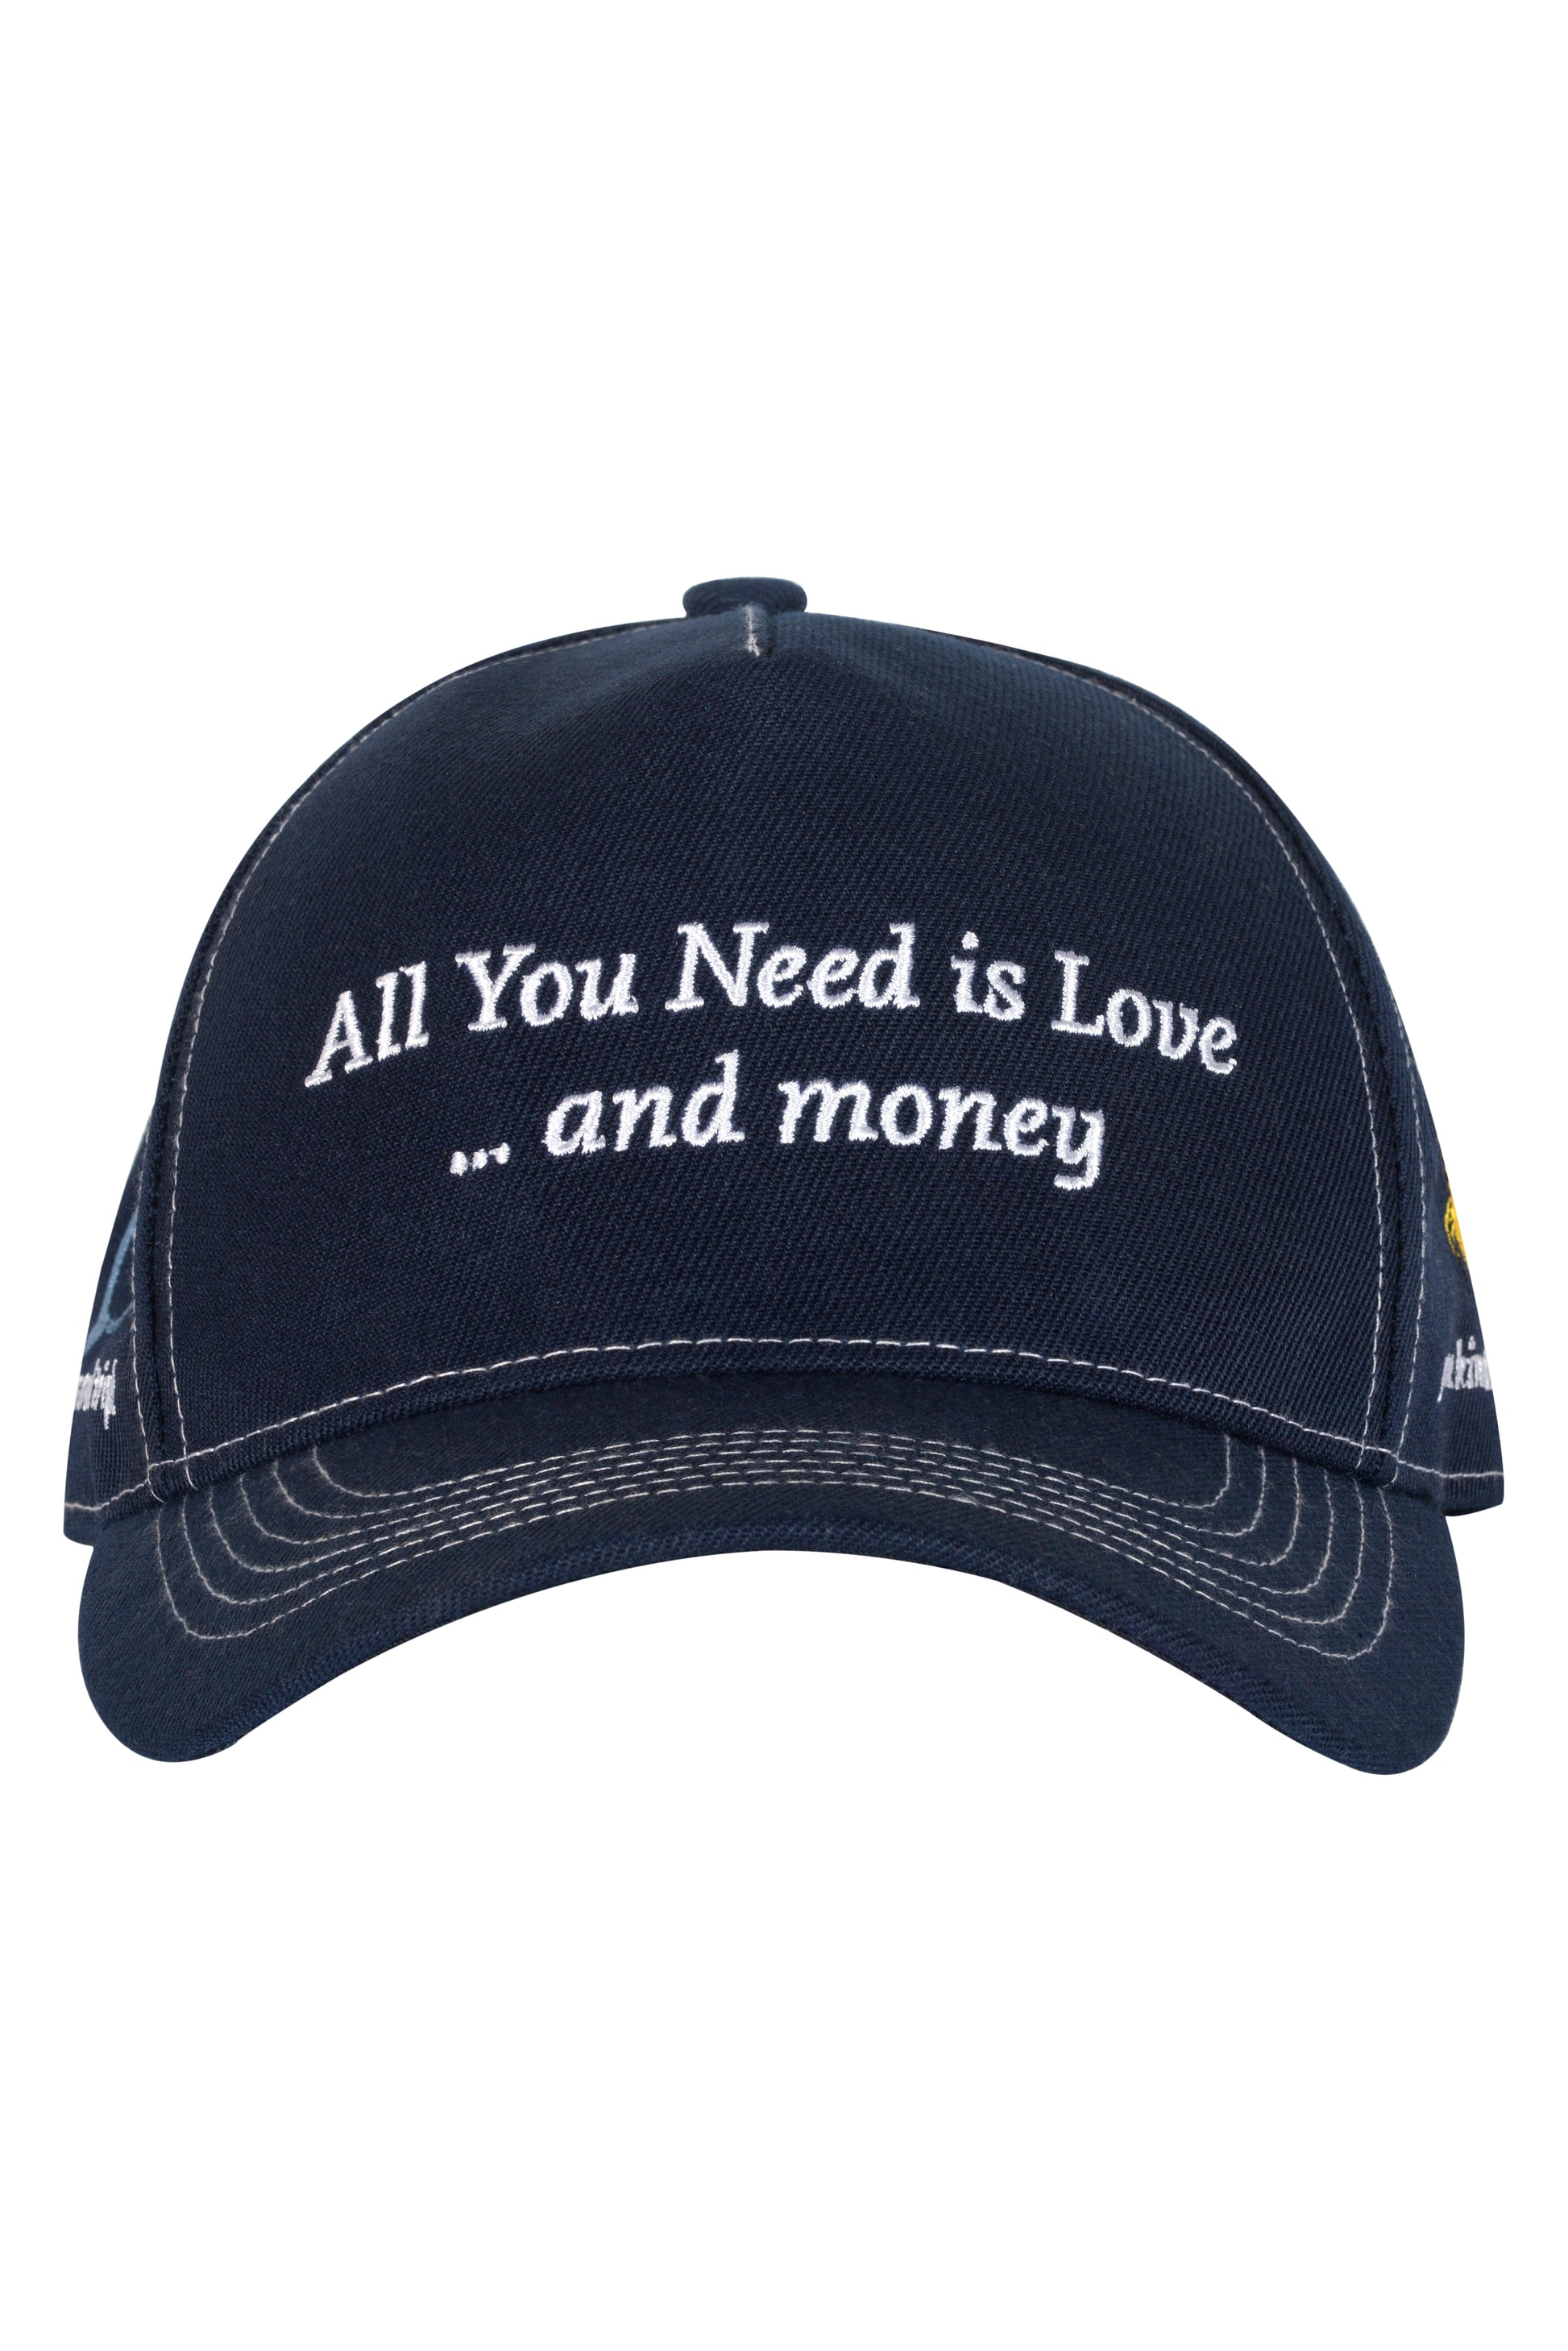 Navy blue cap embroidered with "All You Need is Love... and money" in white thread.